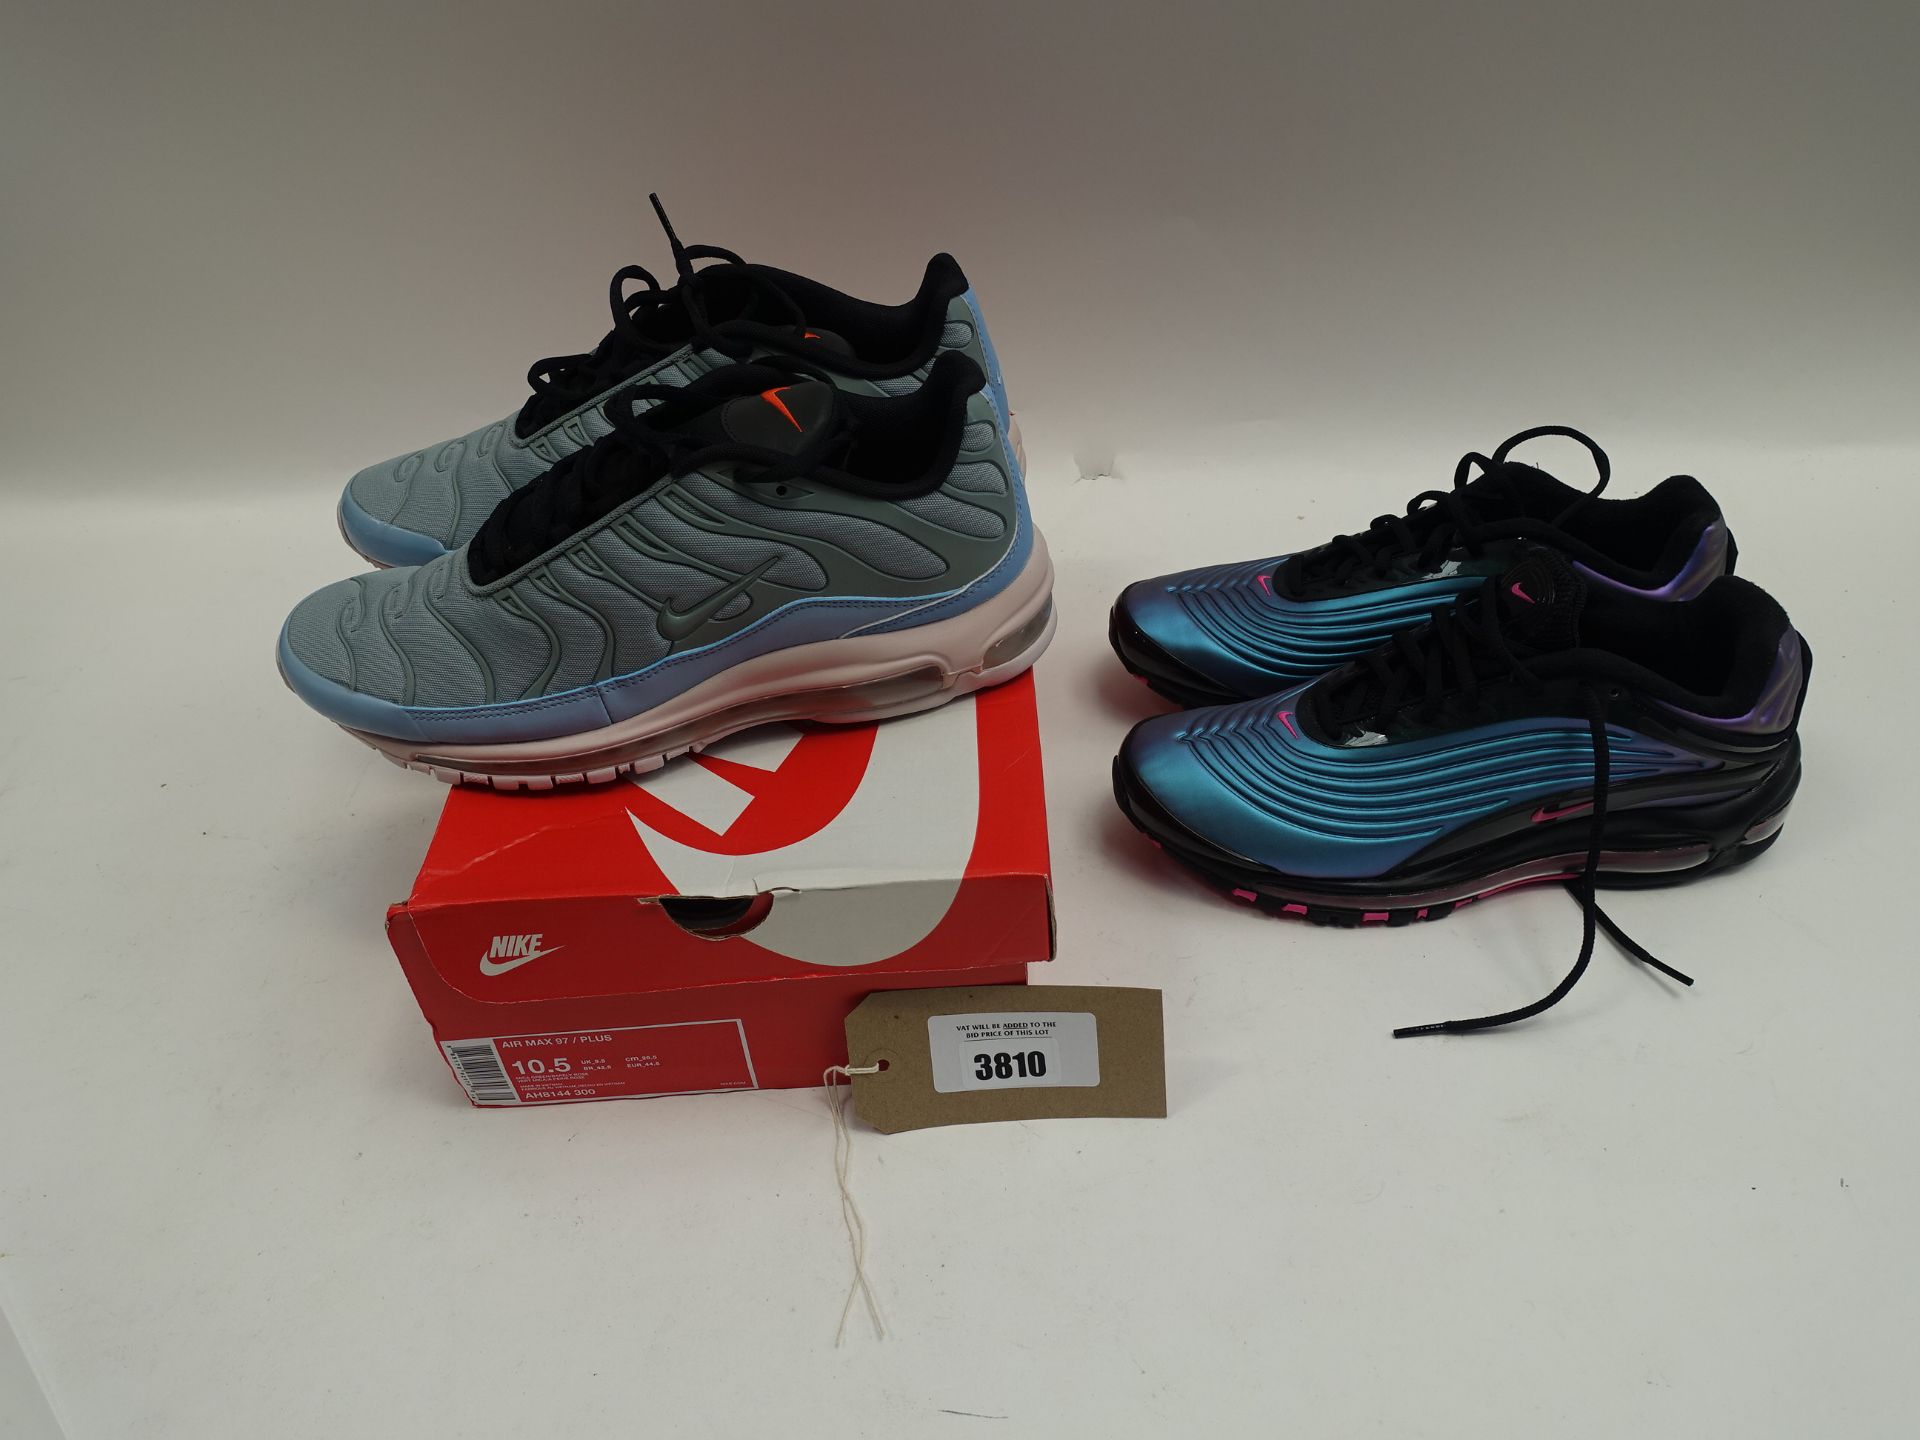 Nike Air Max Deluxe Throwback Future size 8 (used) and Nike Air Max 97 size 9.5